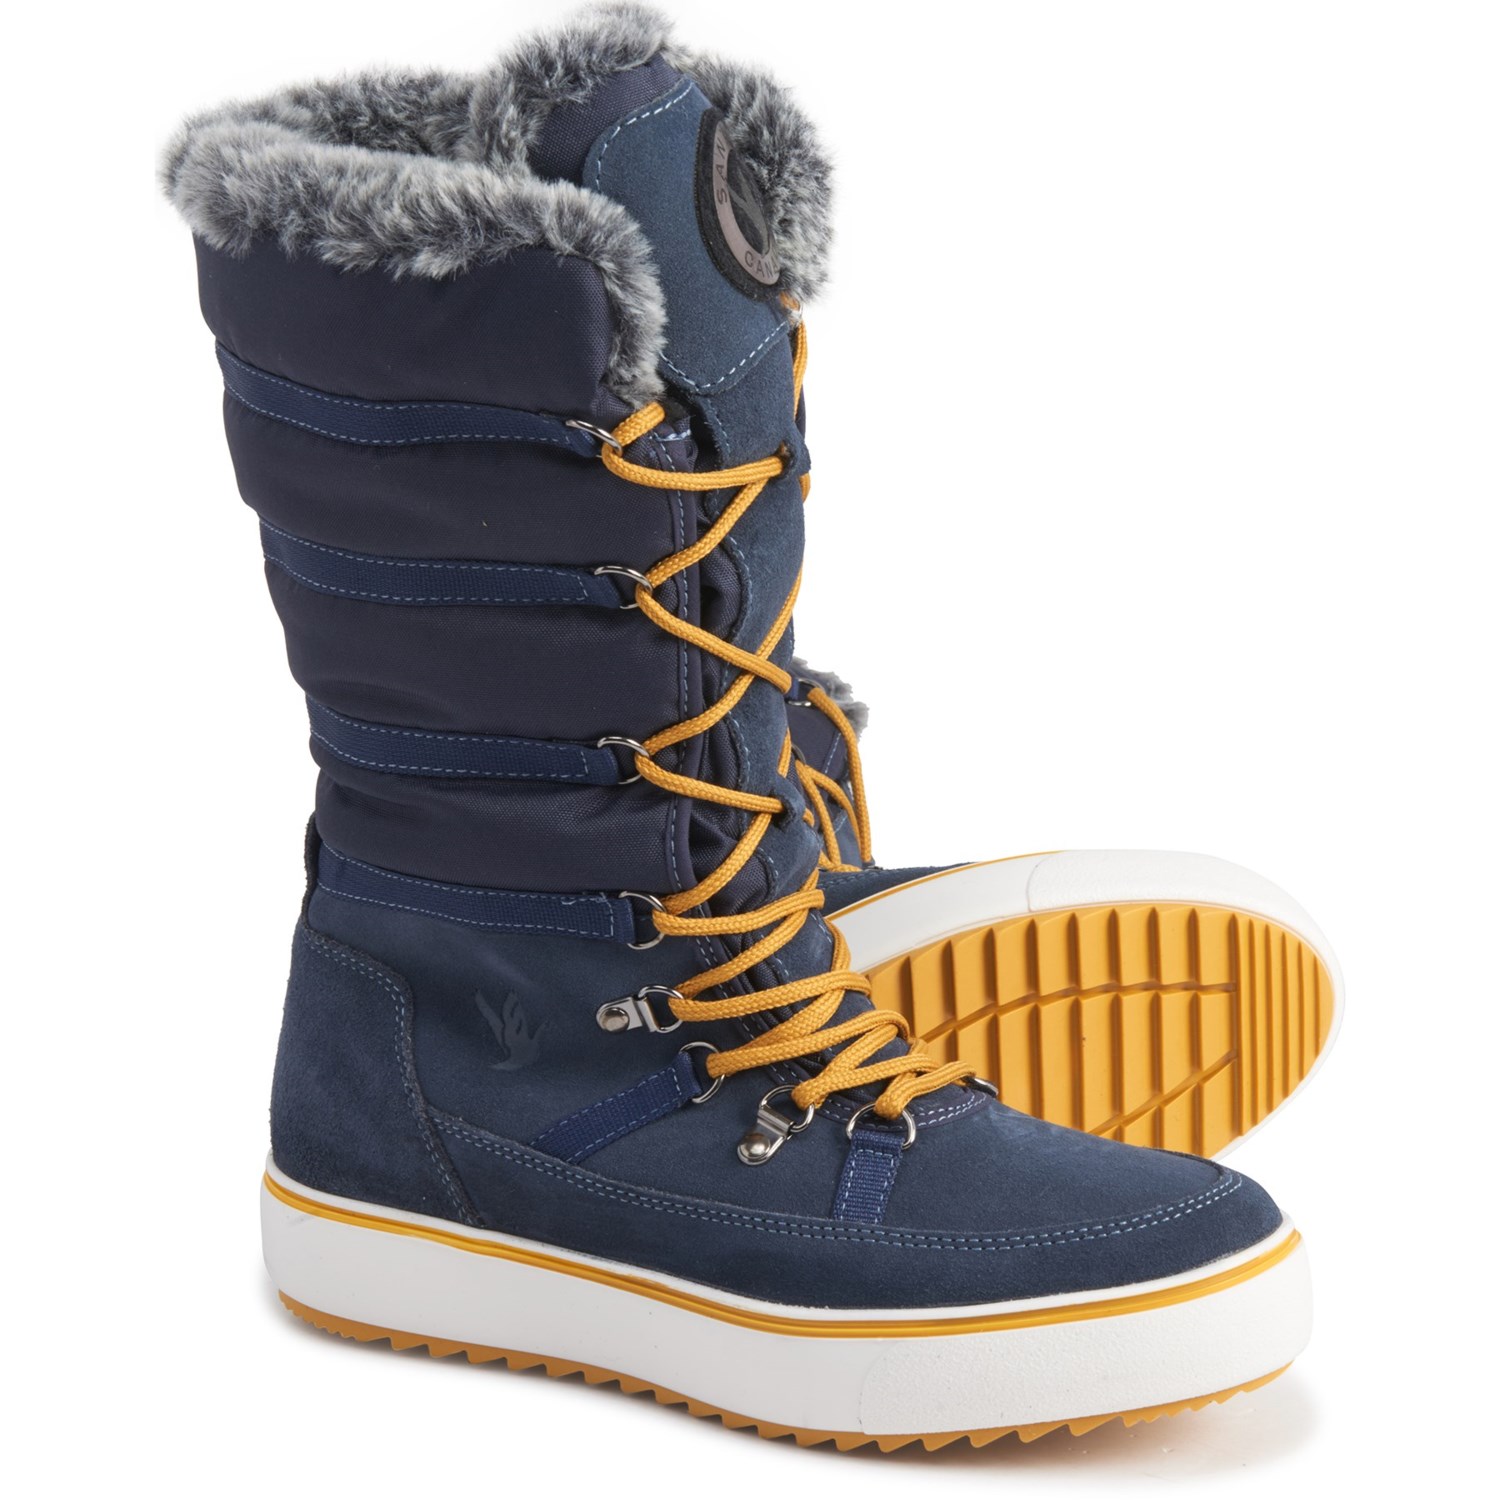 winter boots for ladies canada